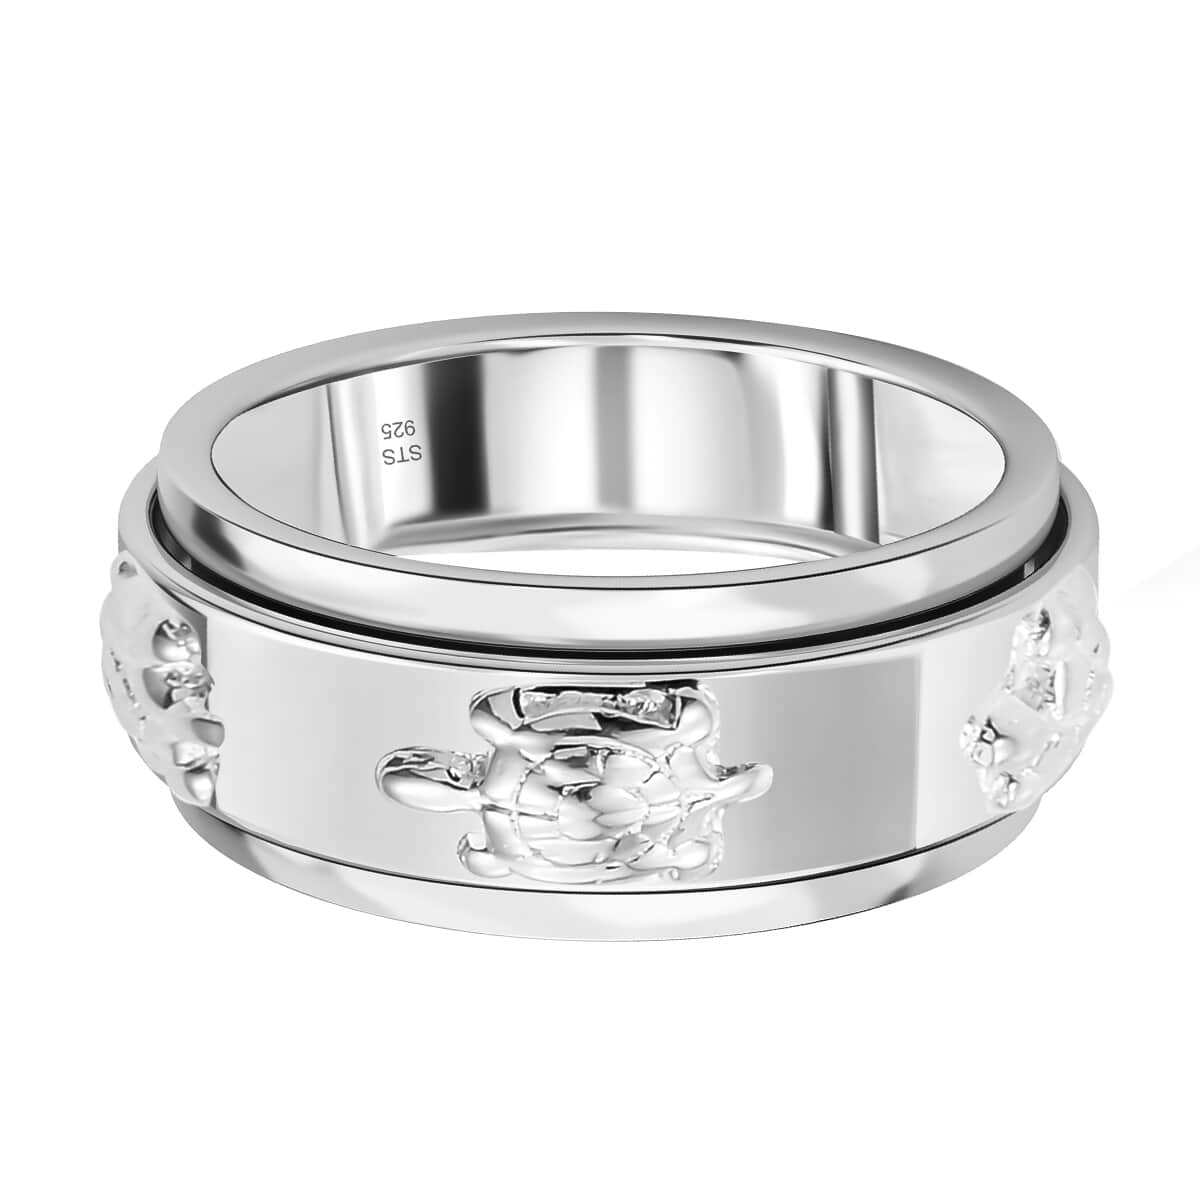 Sterling Silver Turtle Band Spinner Ring, Anxiety Ring for Women, Fidget Rings for Anxiety for Women, Stress Relieving Anxiety Ring (Size 7.0) (5 g) image number 6